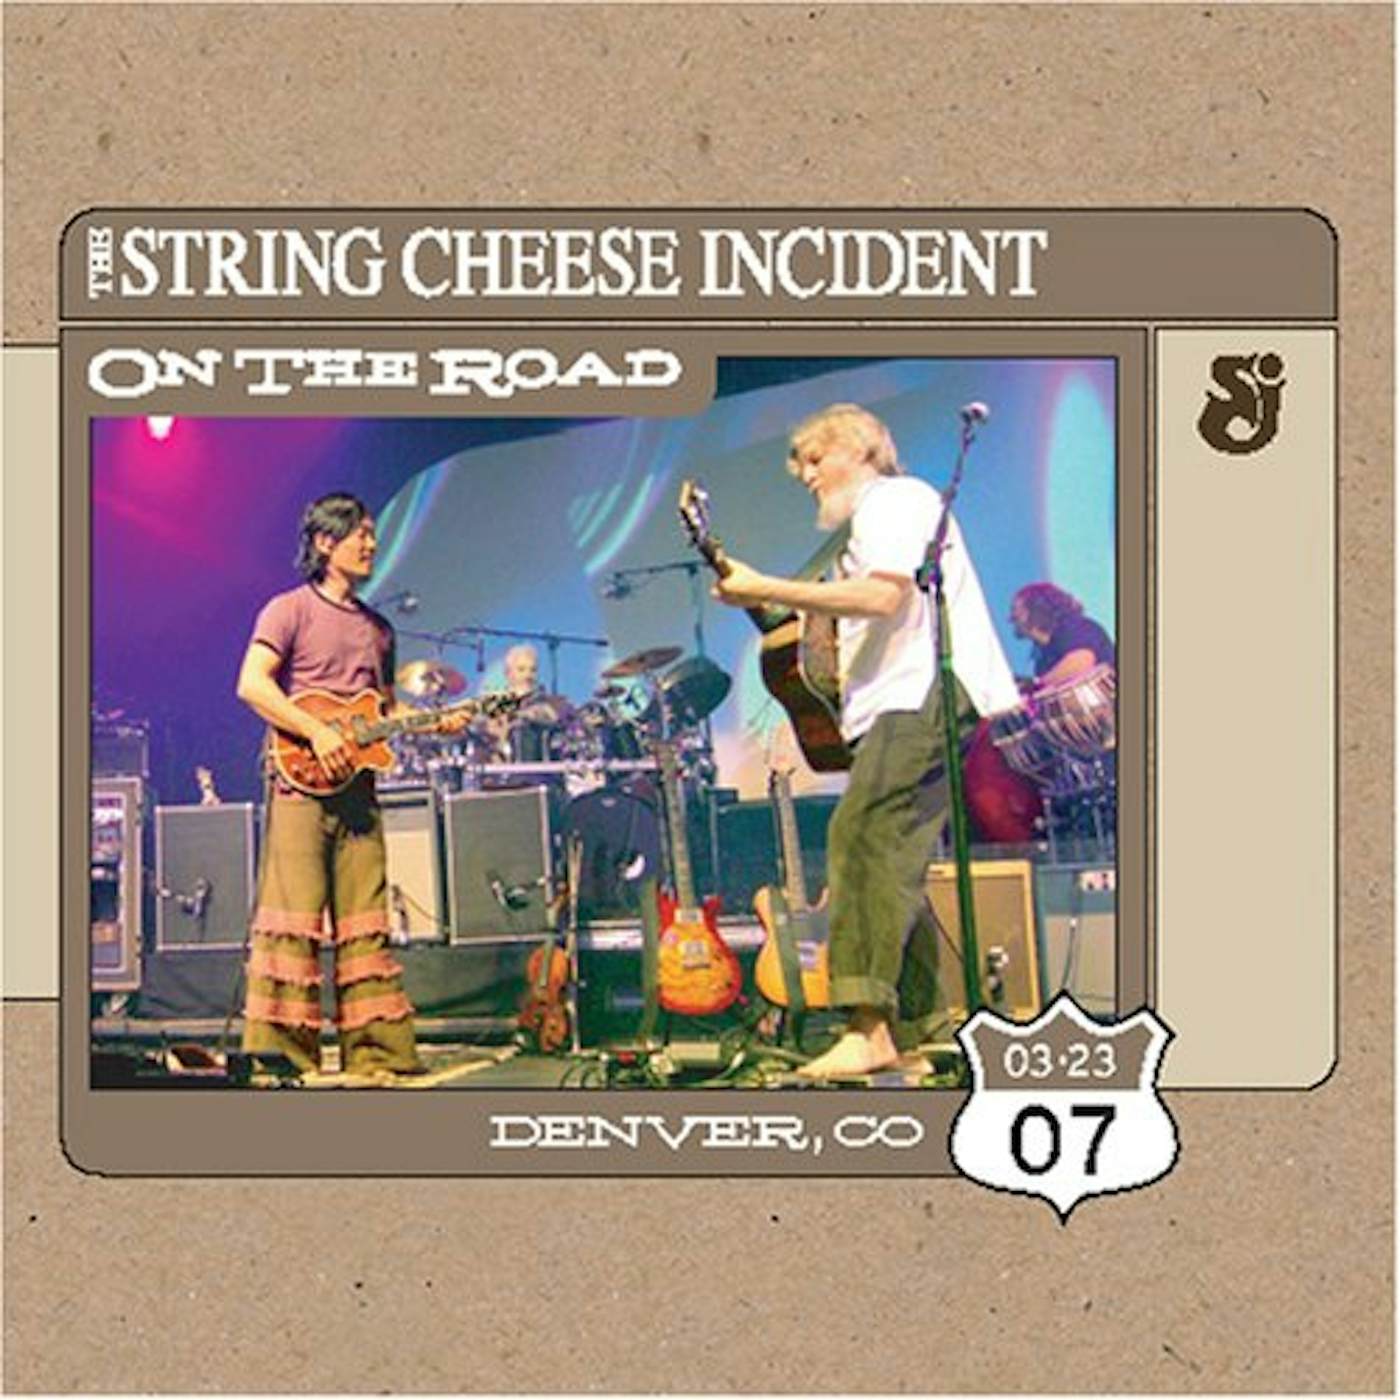 The String Cheese Incident ON THE ROAD: DENVER CO 3-23-7 CD